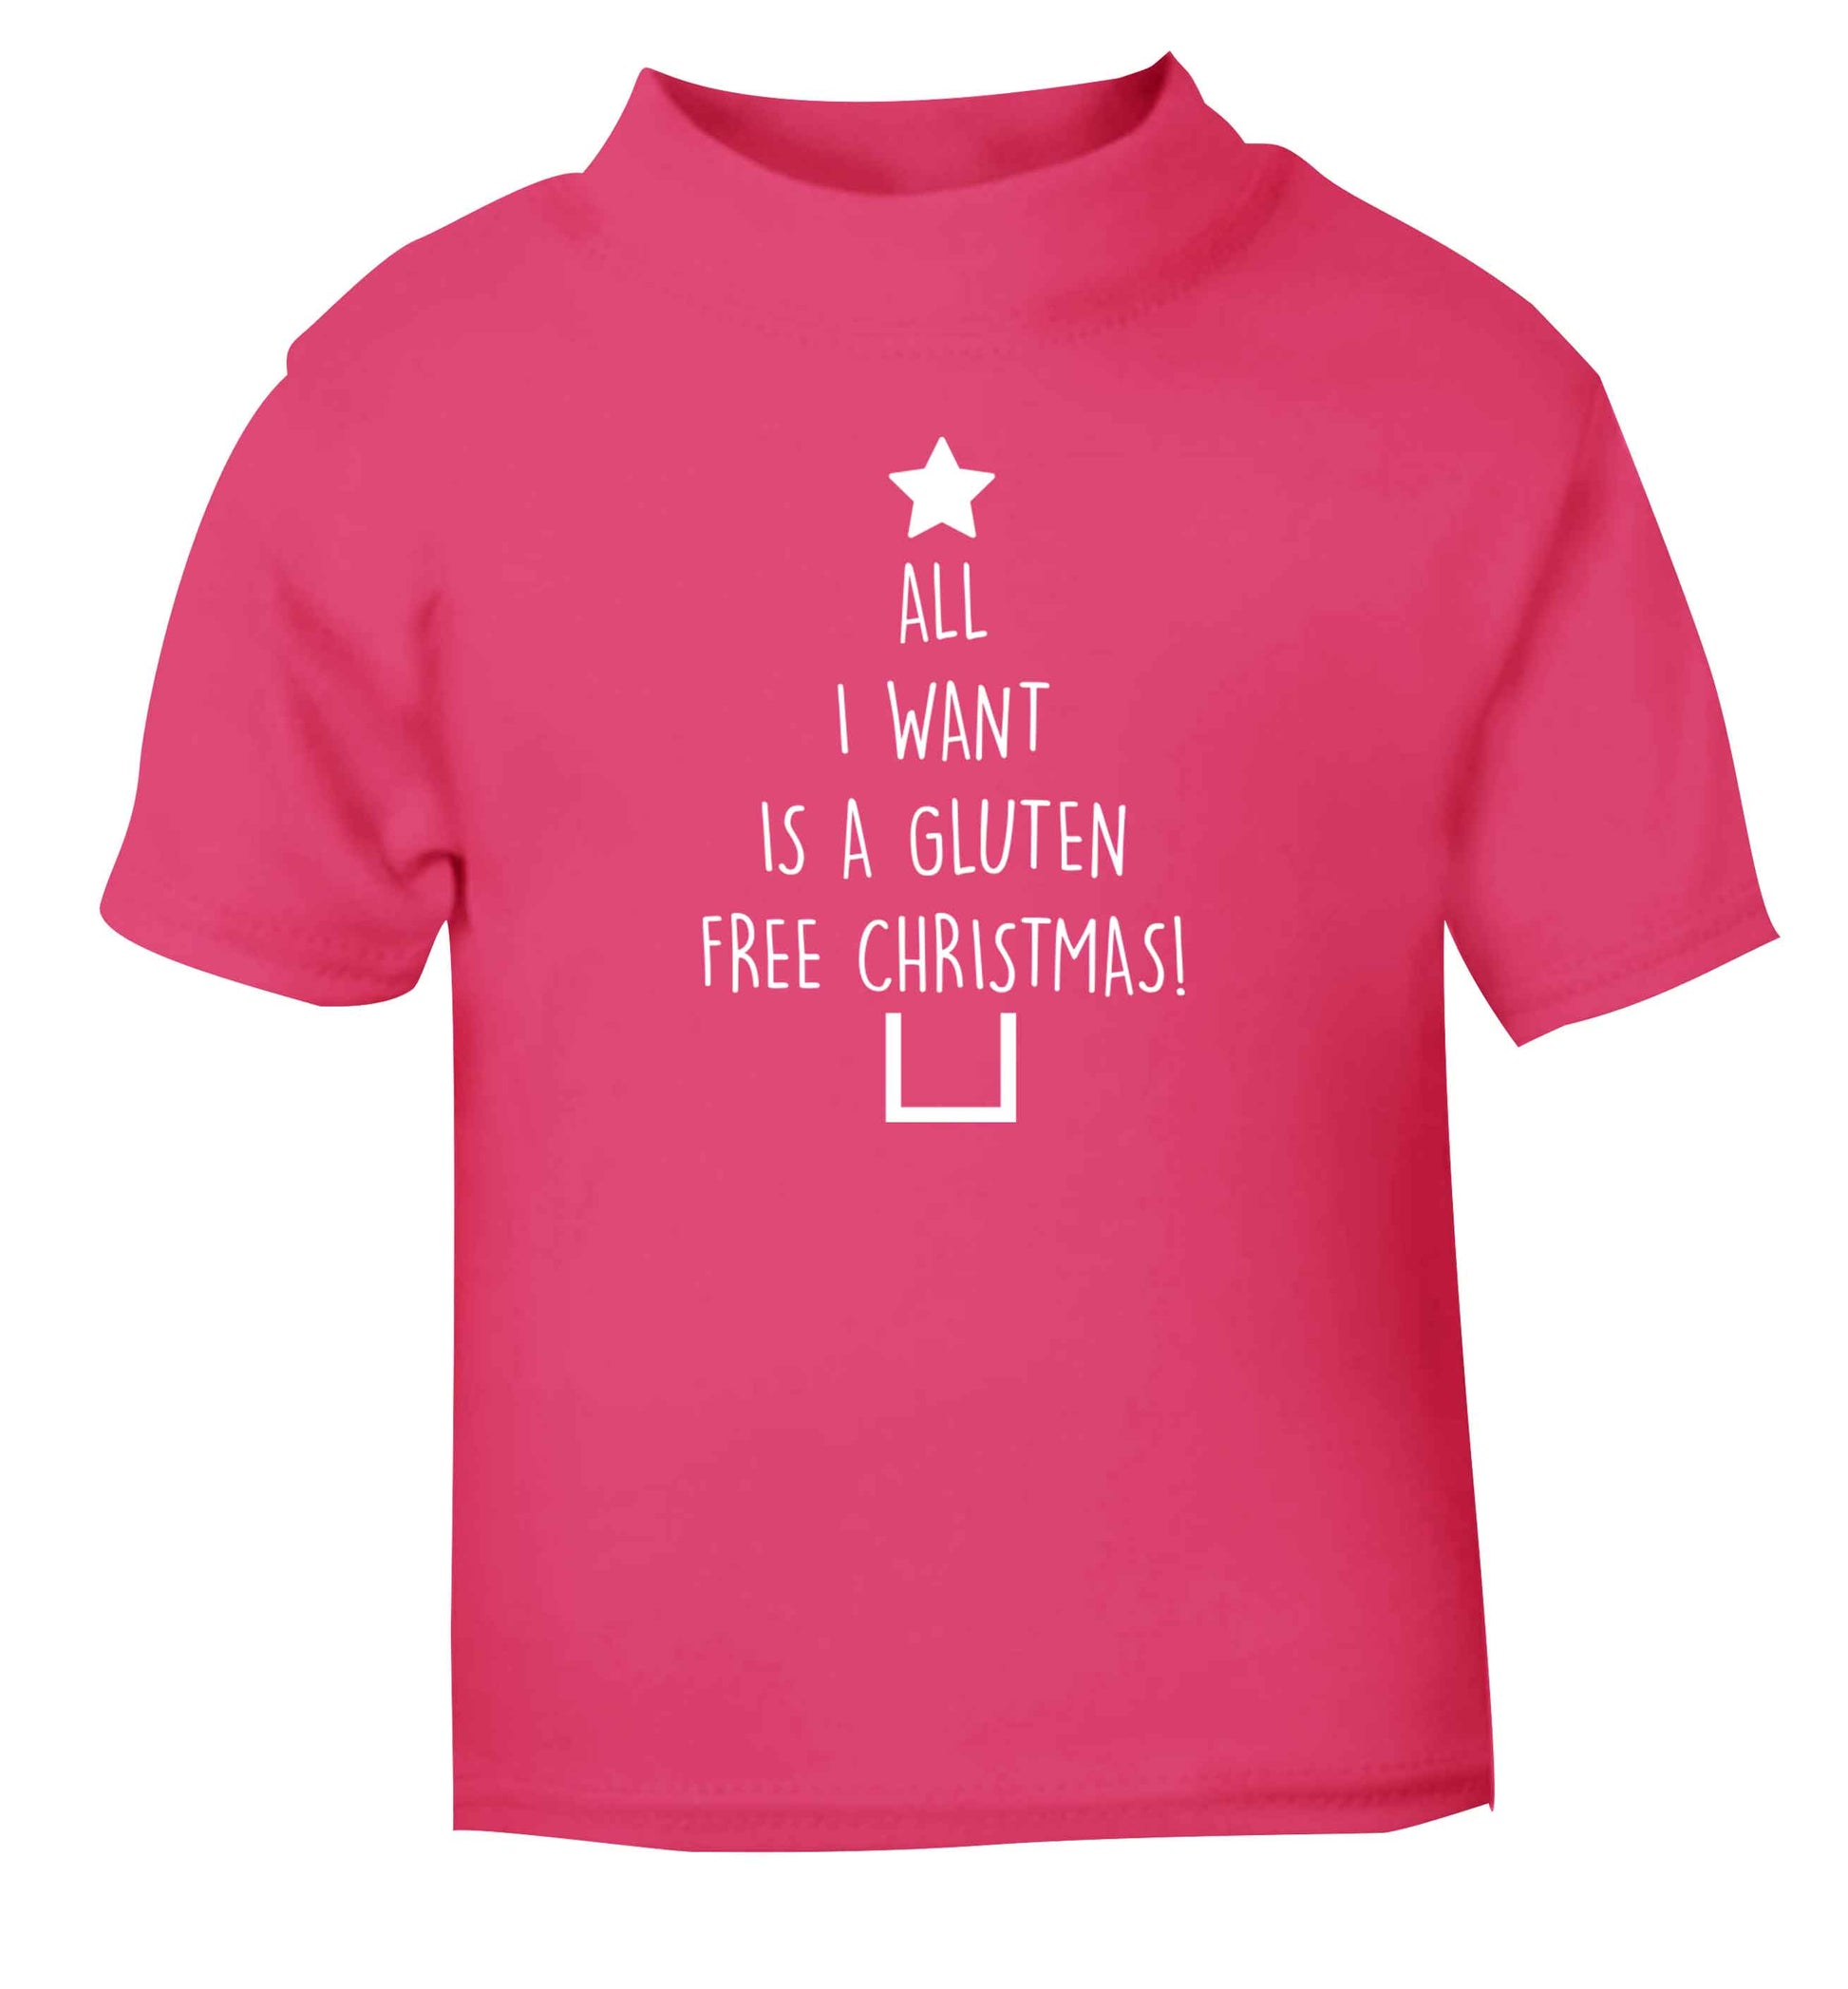 All I want is a gluten free Christmas pink Baby Toddler Tshirt 2 Years